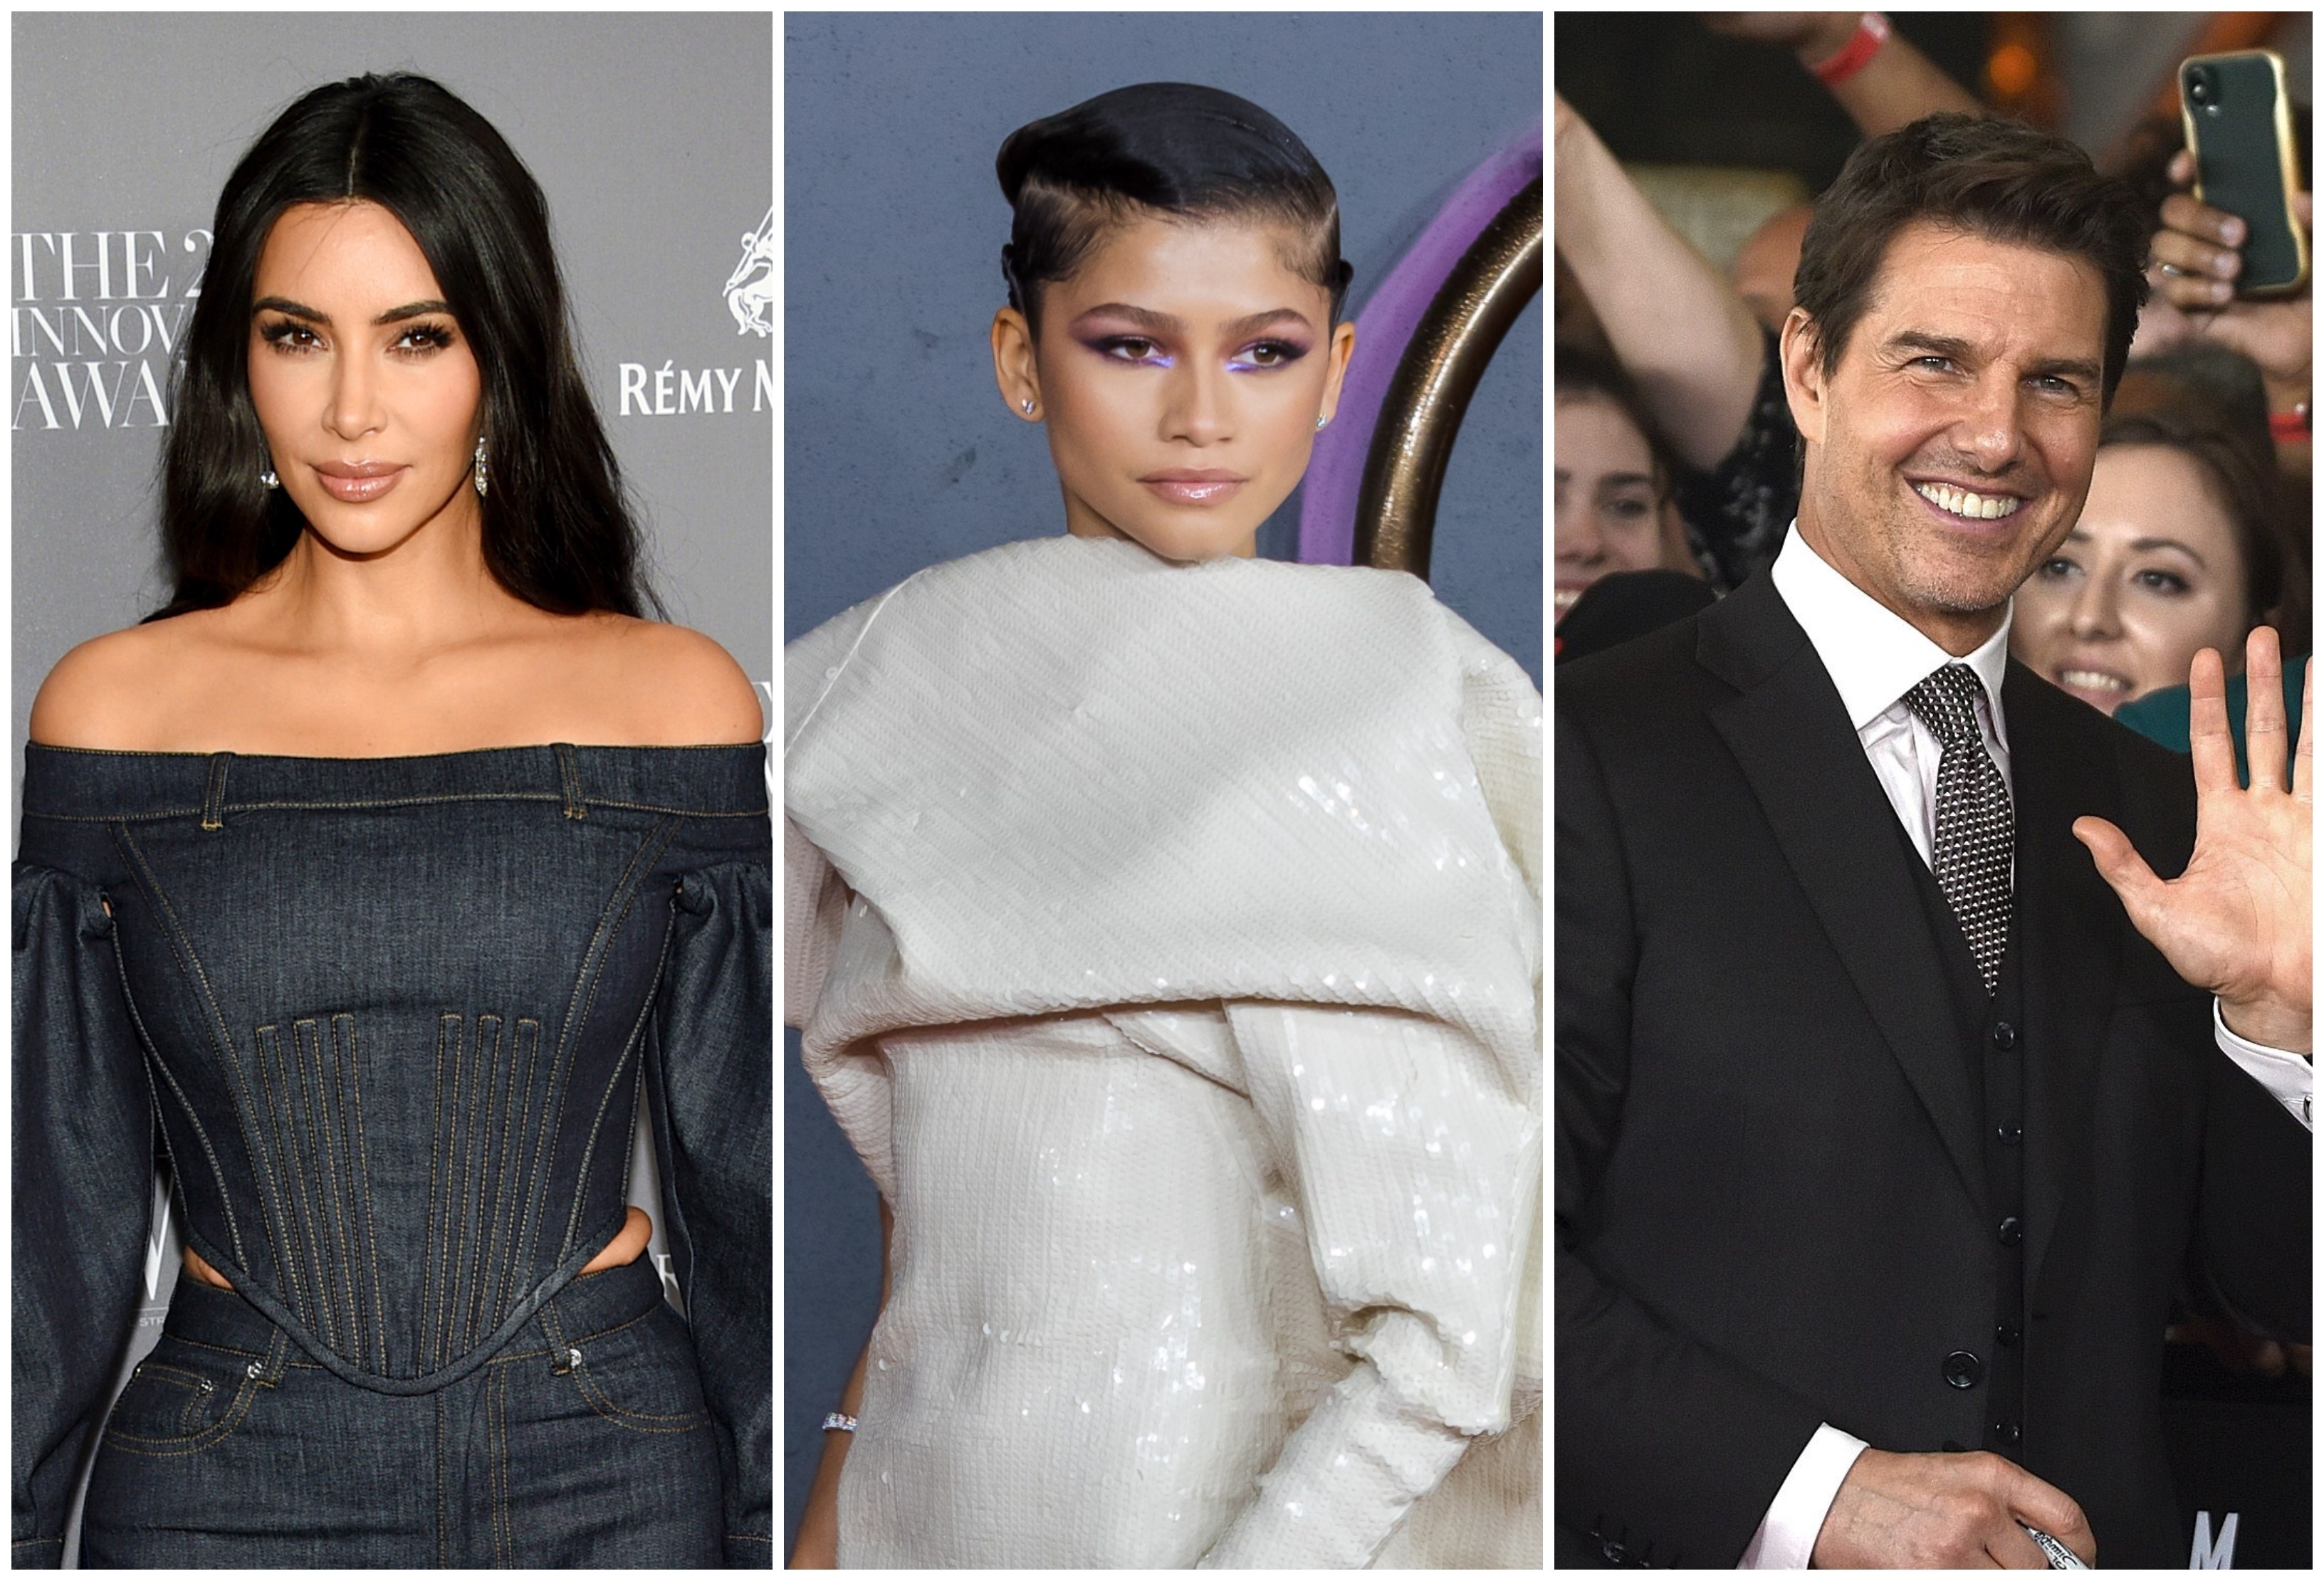 The Kardashians gifted Rolexes to their KUWTK film crew, Zendaya gave out shares after Malcolm & Marie, and Tom Cruise splashed on holiday presents for the Mission: Impossible 7 staff. Photos: AP, EPA-EFE, AFP